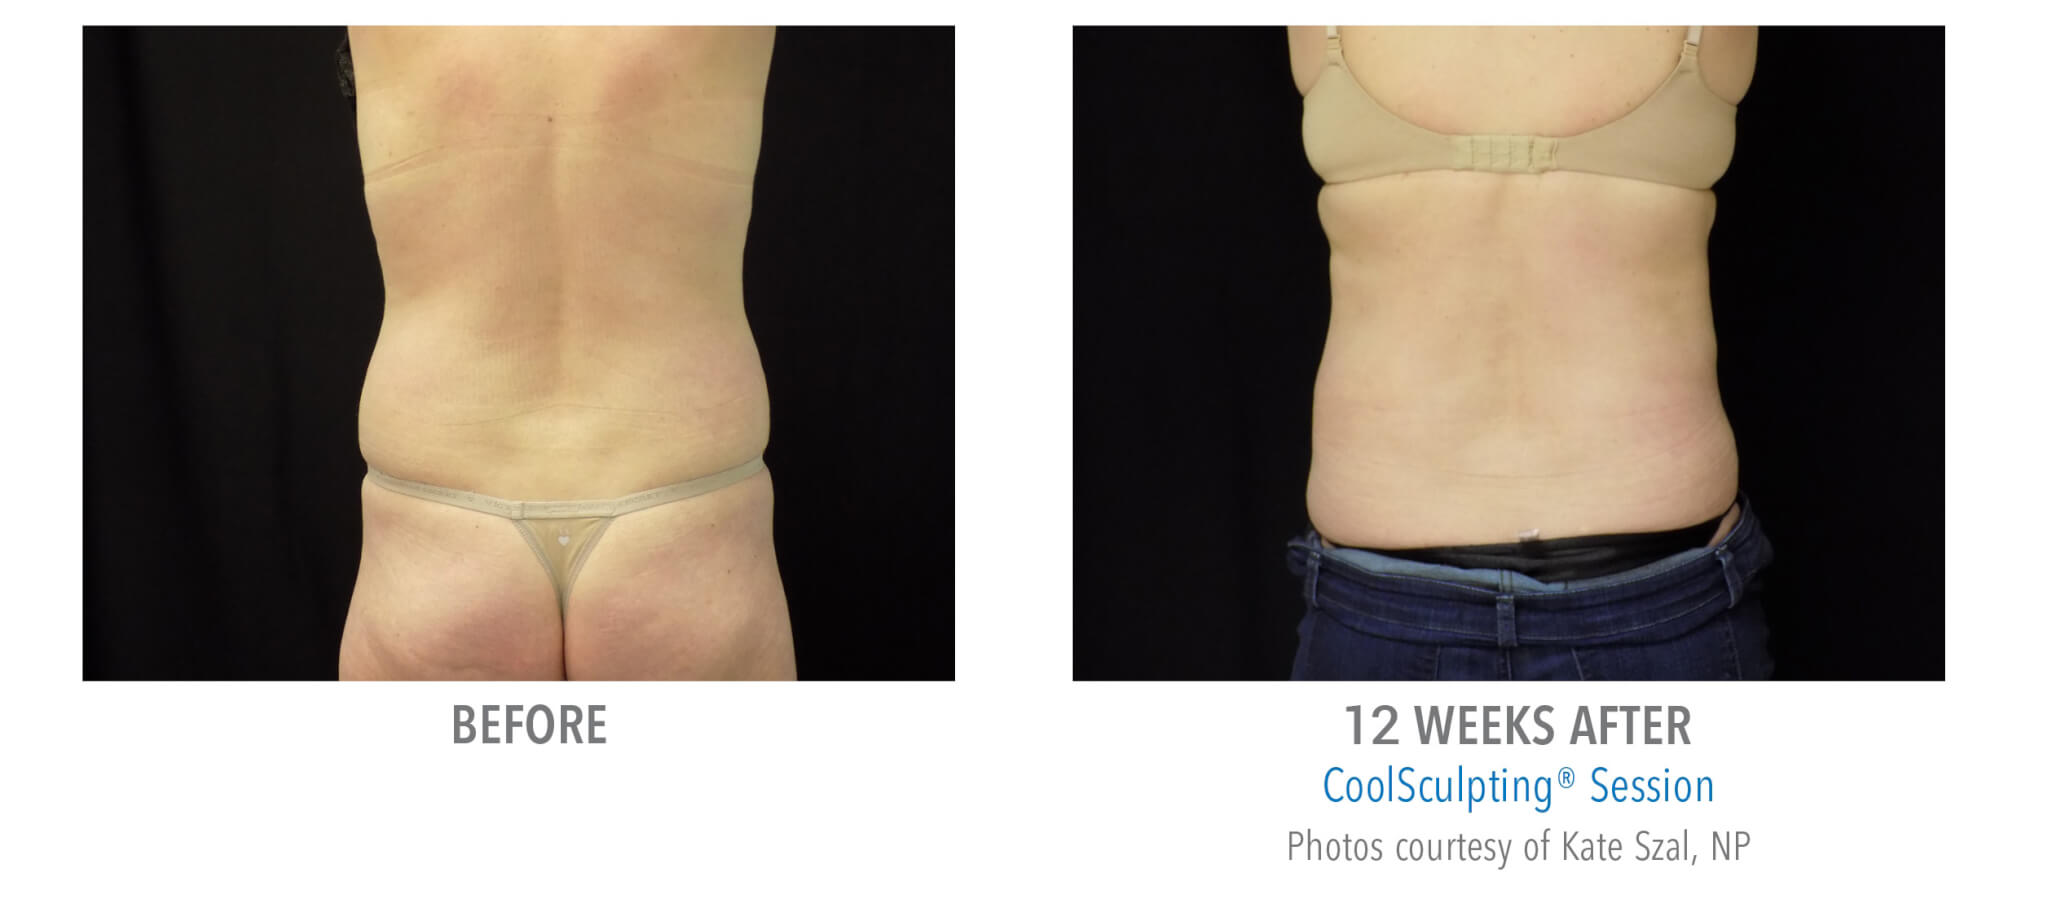 CS6 coolsculpting patient before and after